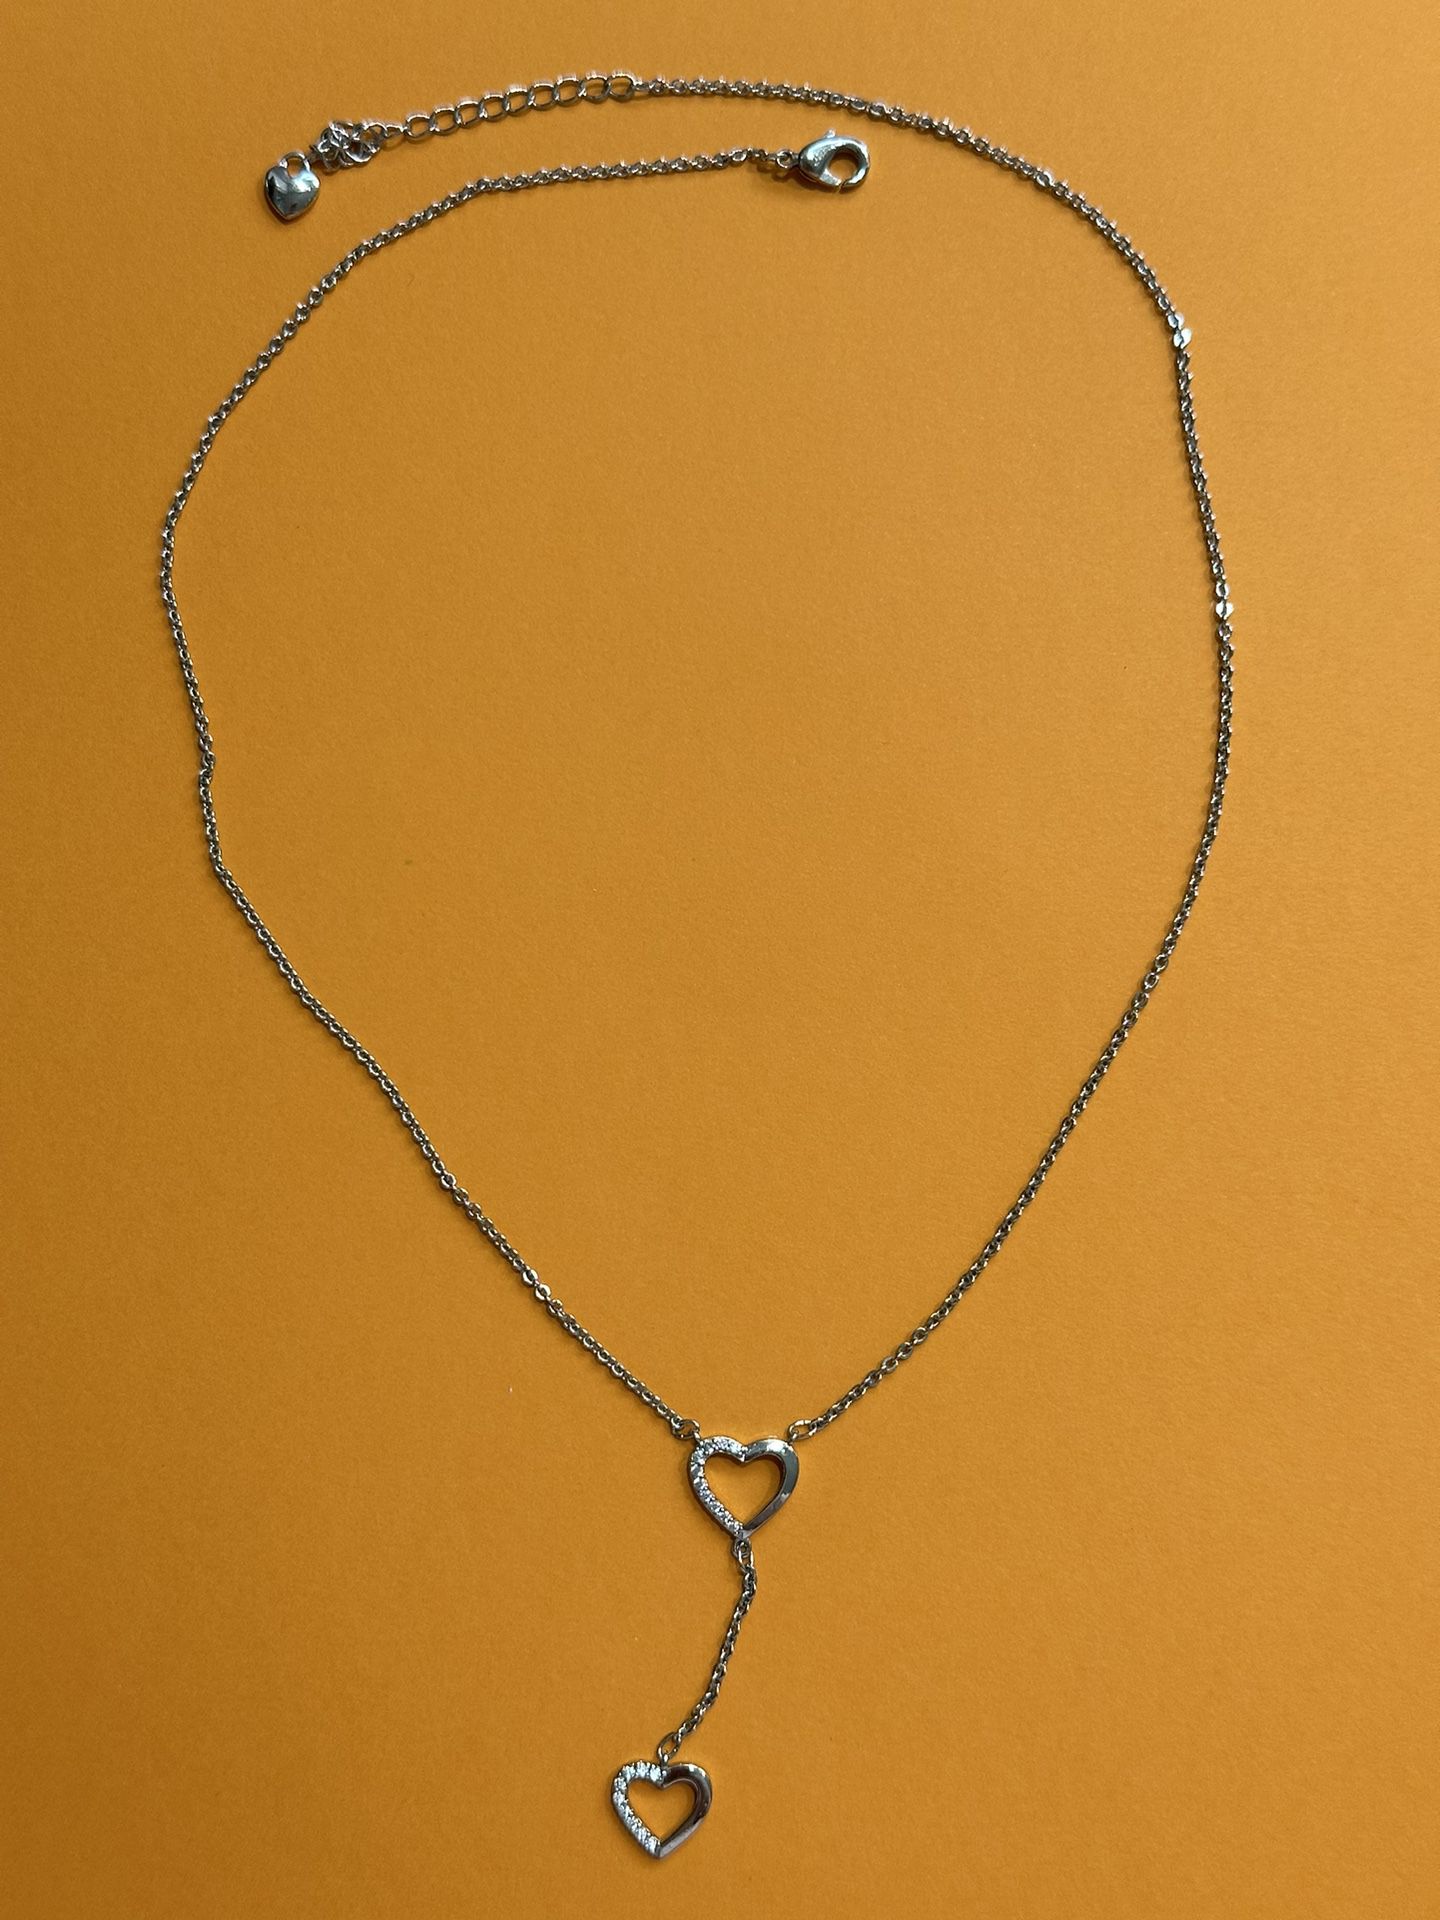 Silver tone dainty dangling hearts necklace.